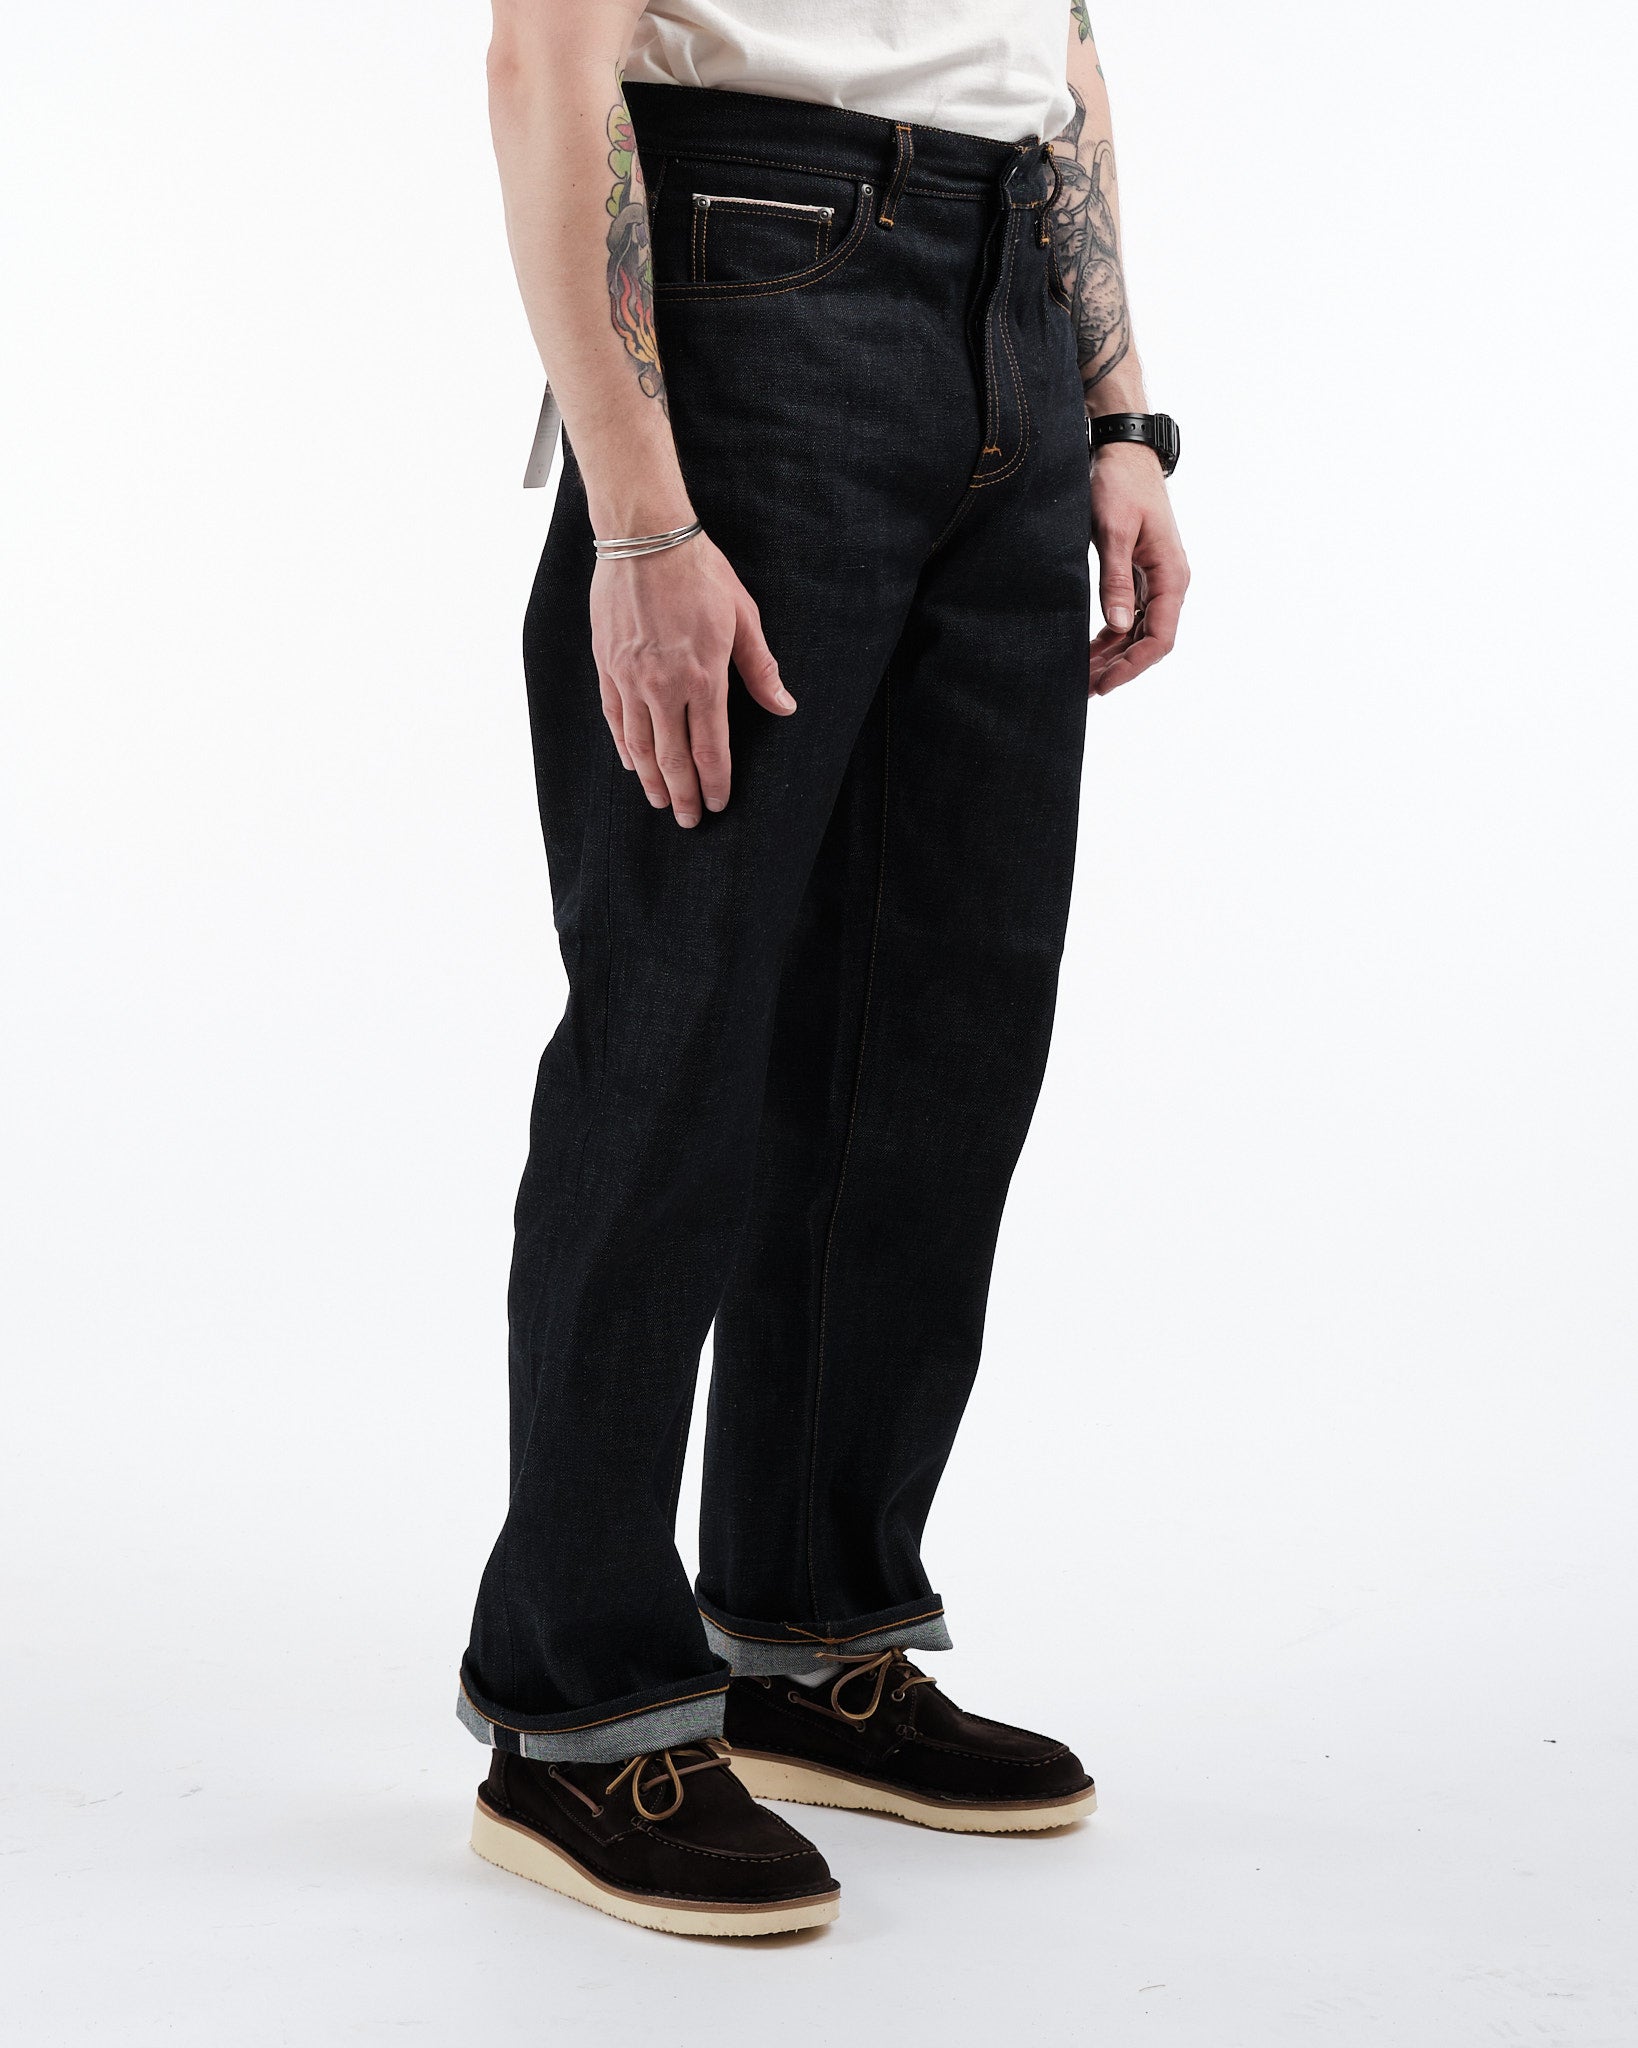 Tuff Tony Dry Ace Selvage - Meadow